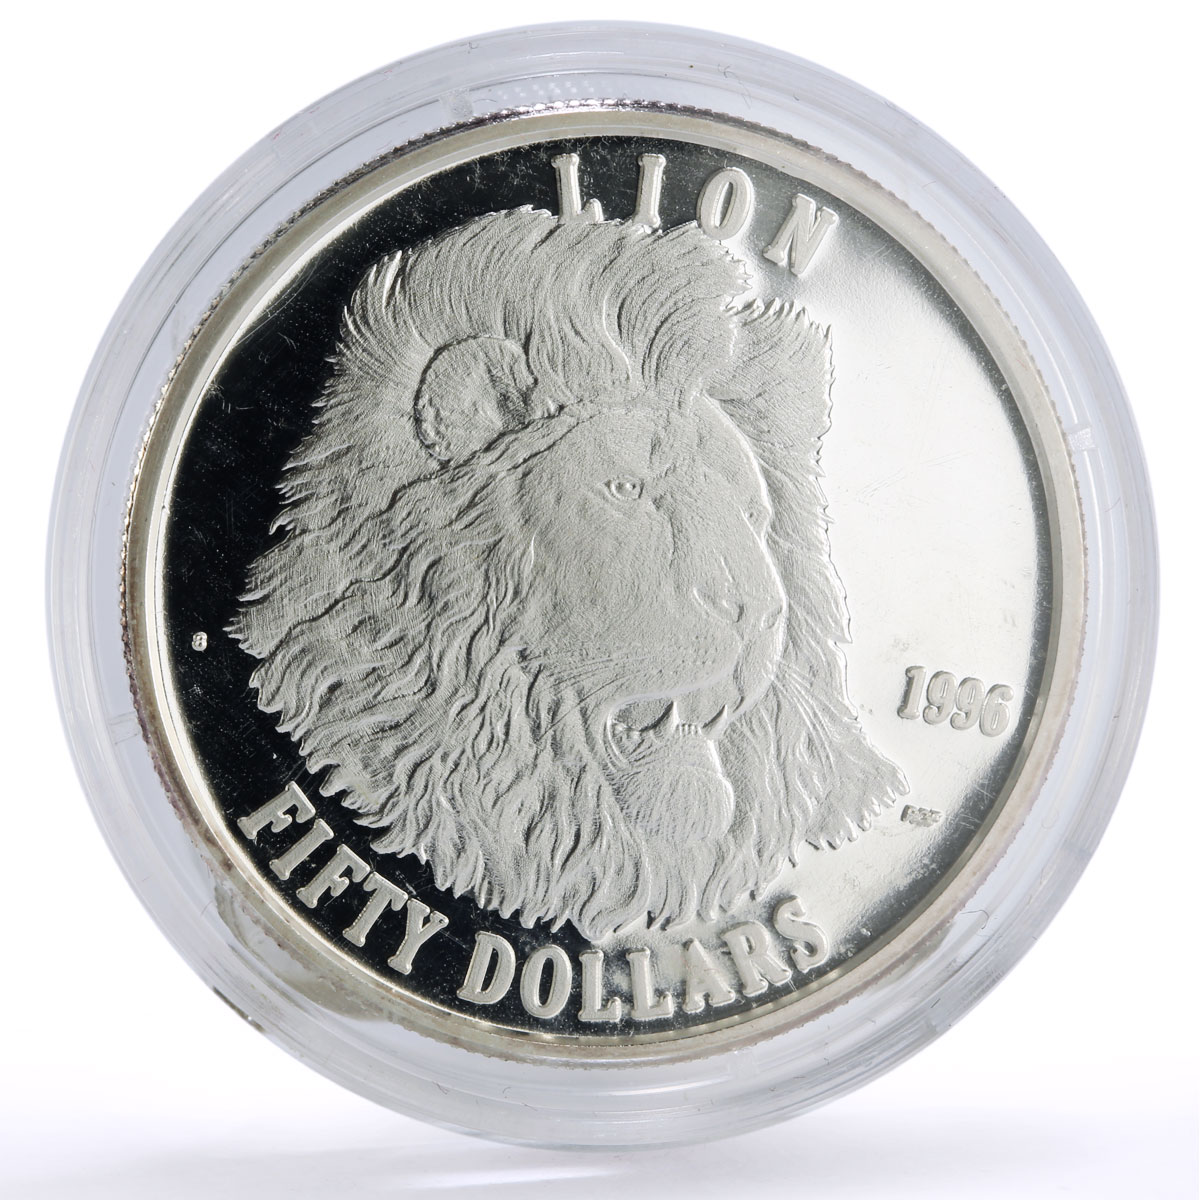 Marshall Islands 50 dollars Conservation Wildlife Lion Fauna silver coin 1996